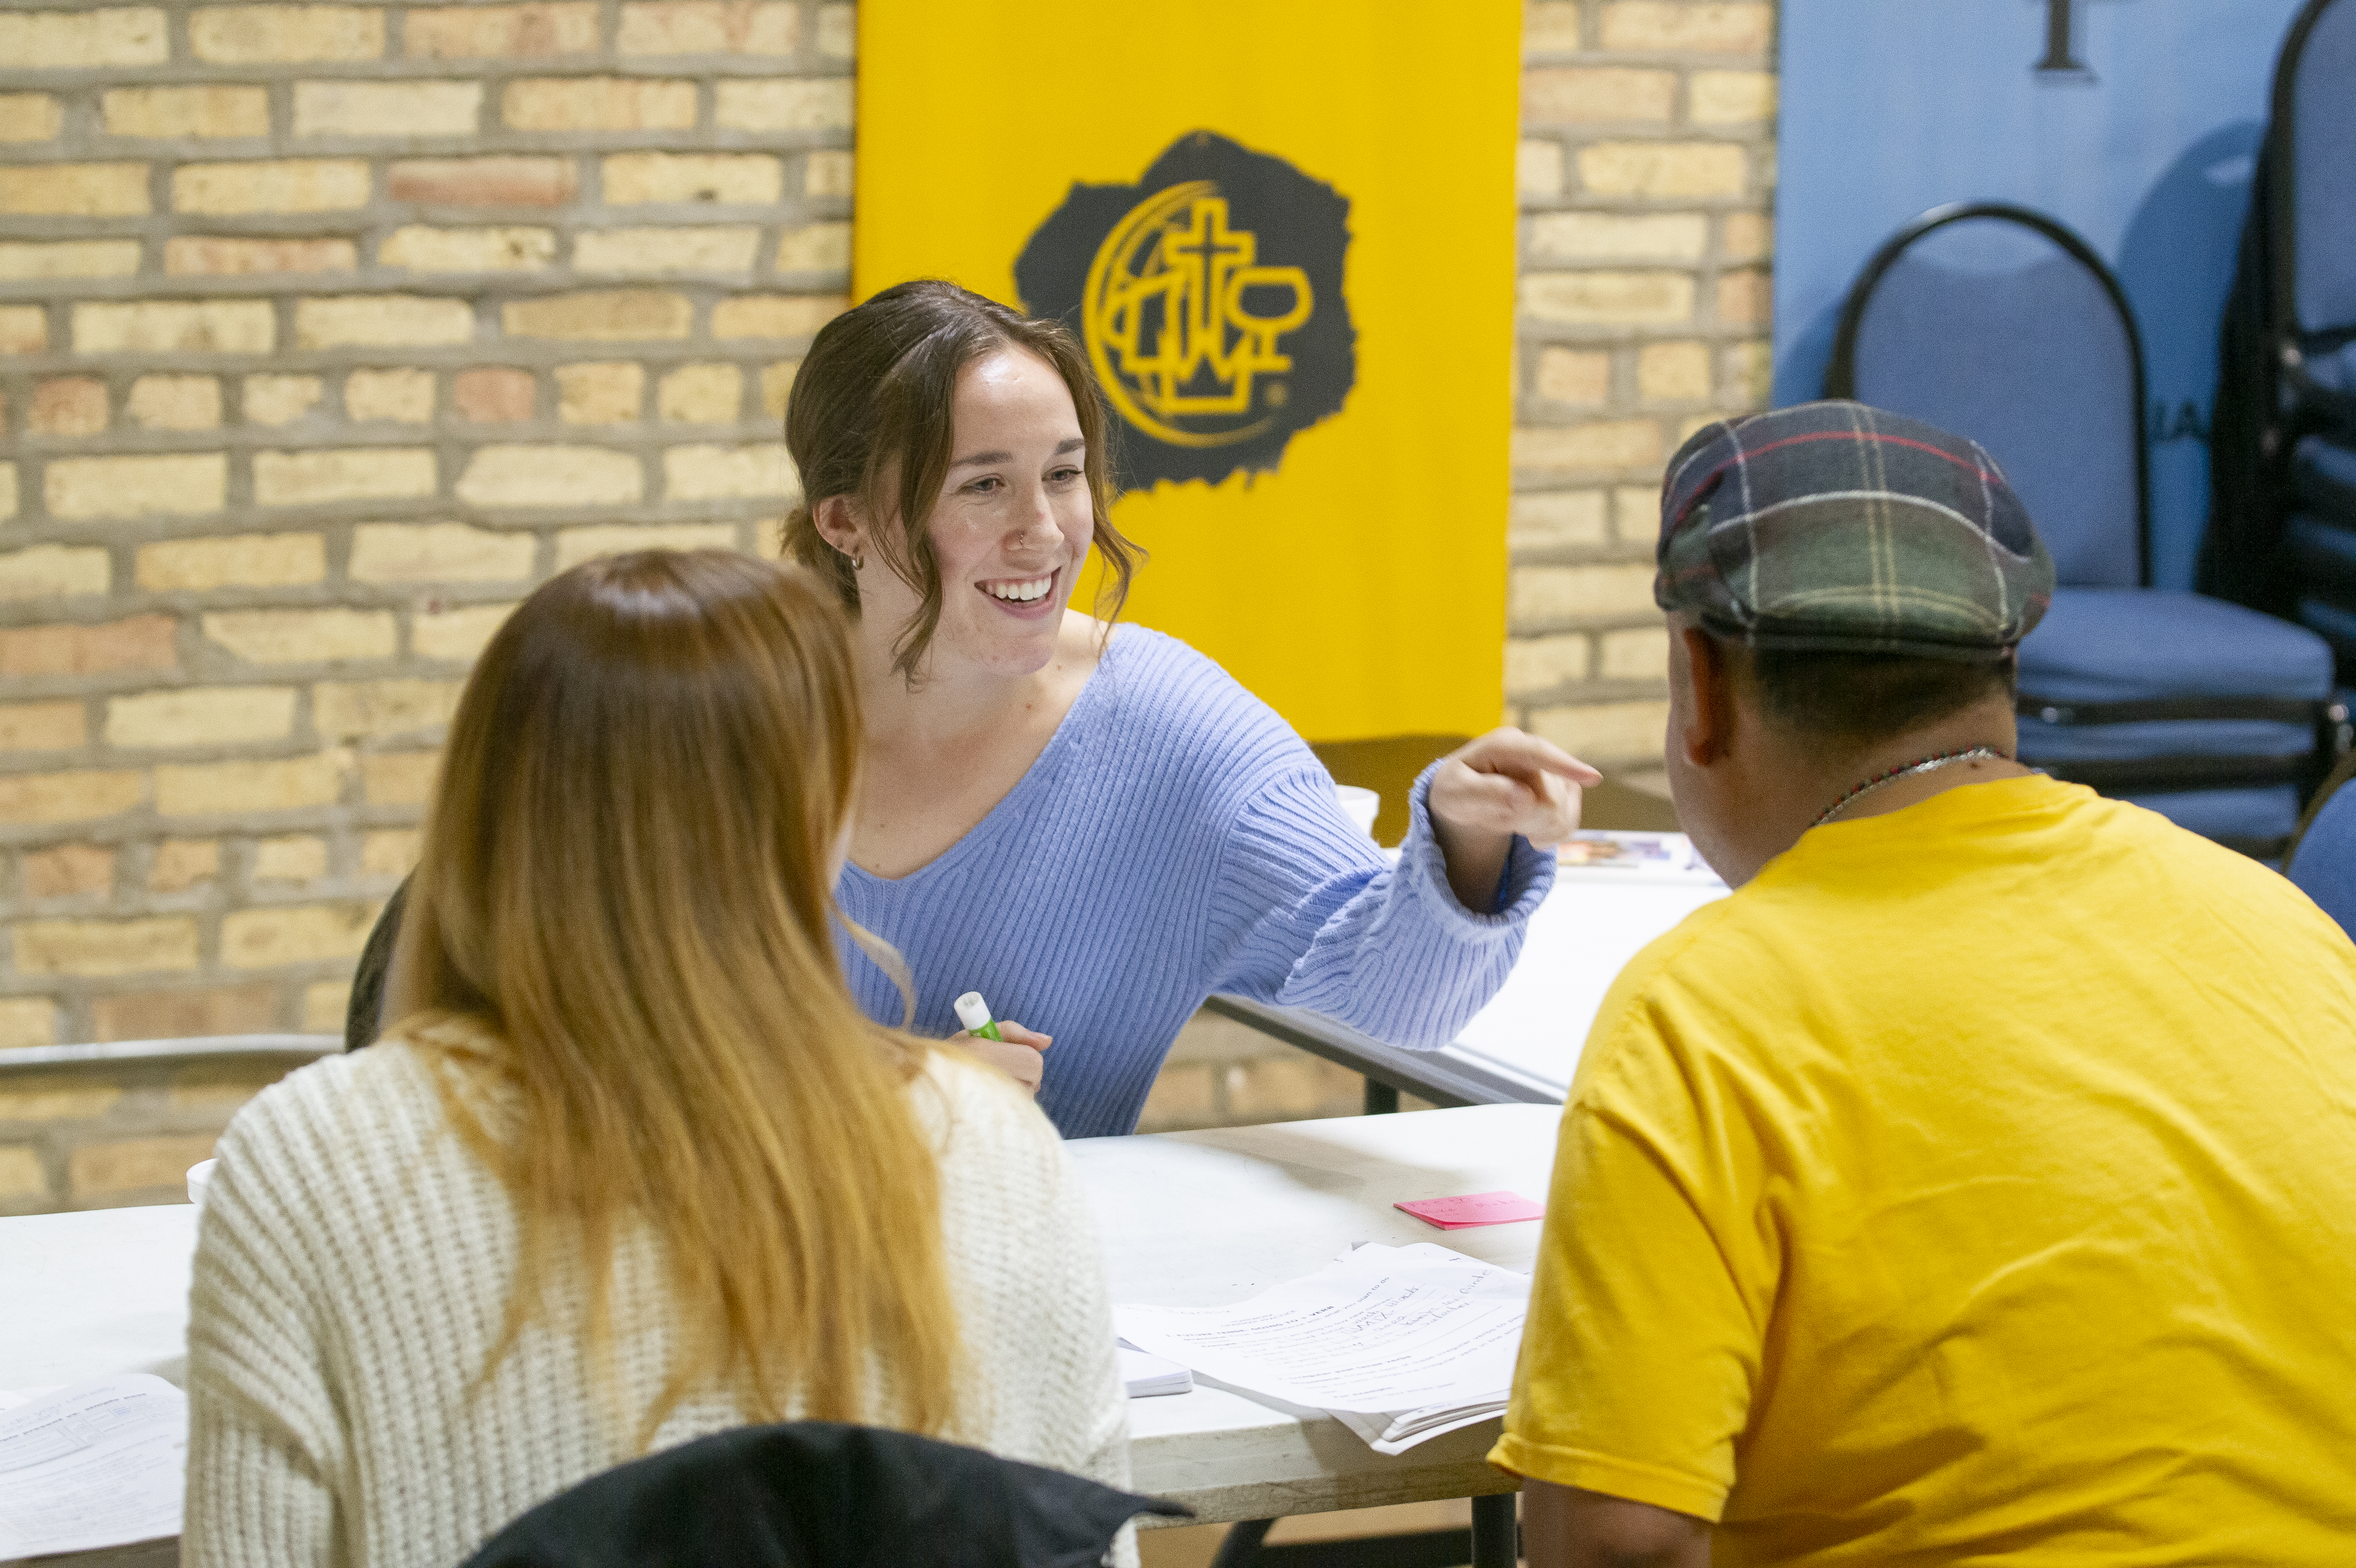 Grace, a student at Moody Bible Institute, teaches conversational English during a class at the Family Empowerment Center in Chicago's Rogers Park.